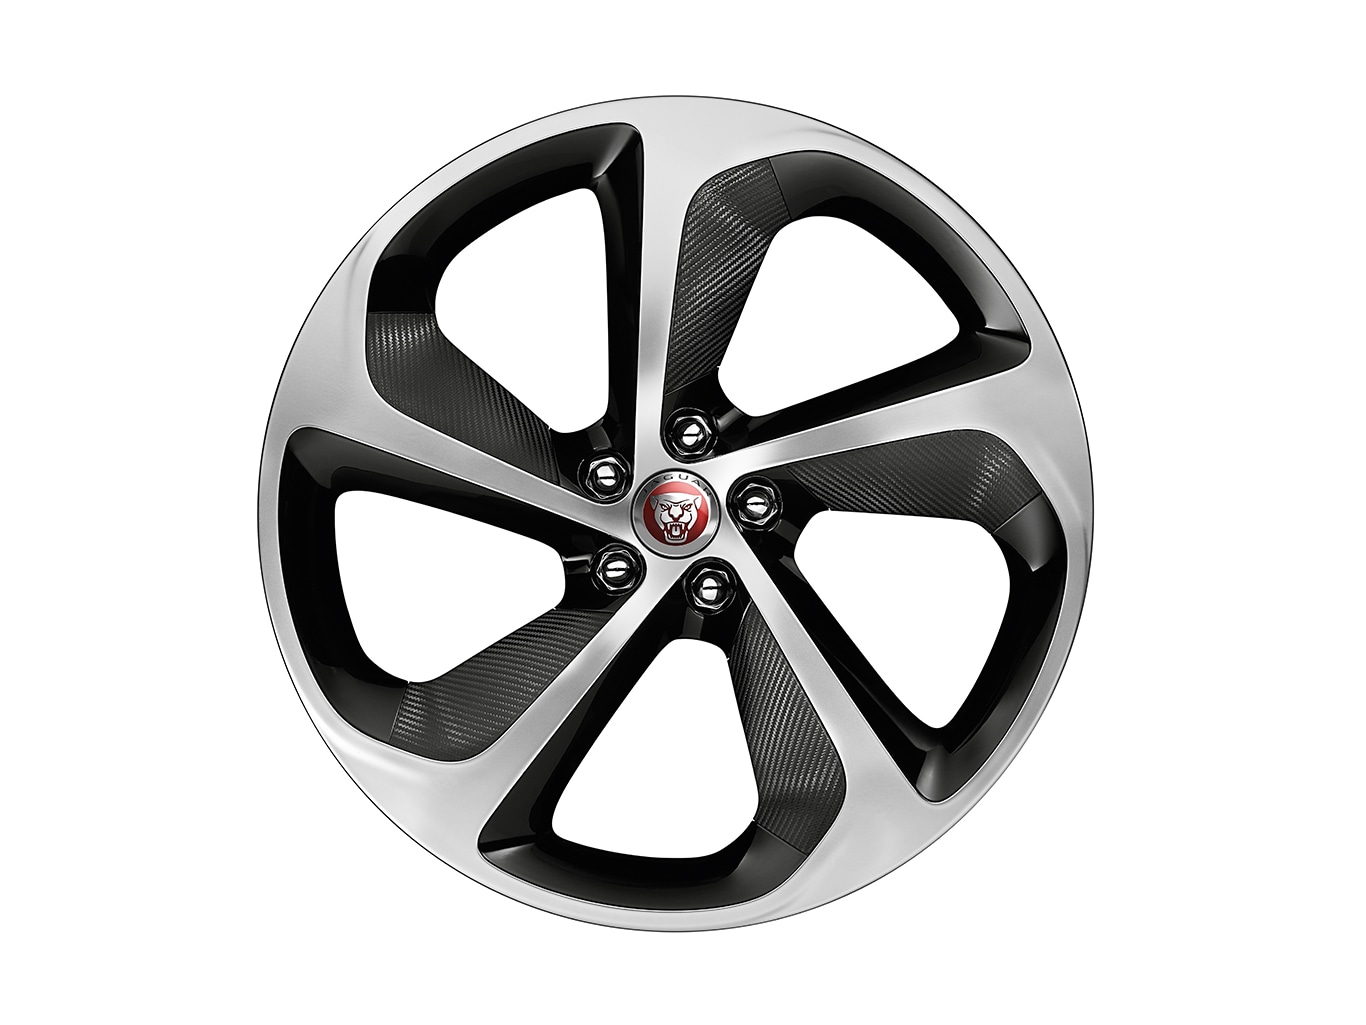 20" Forged, Style 5062, rear